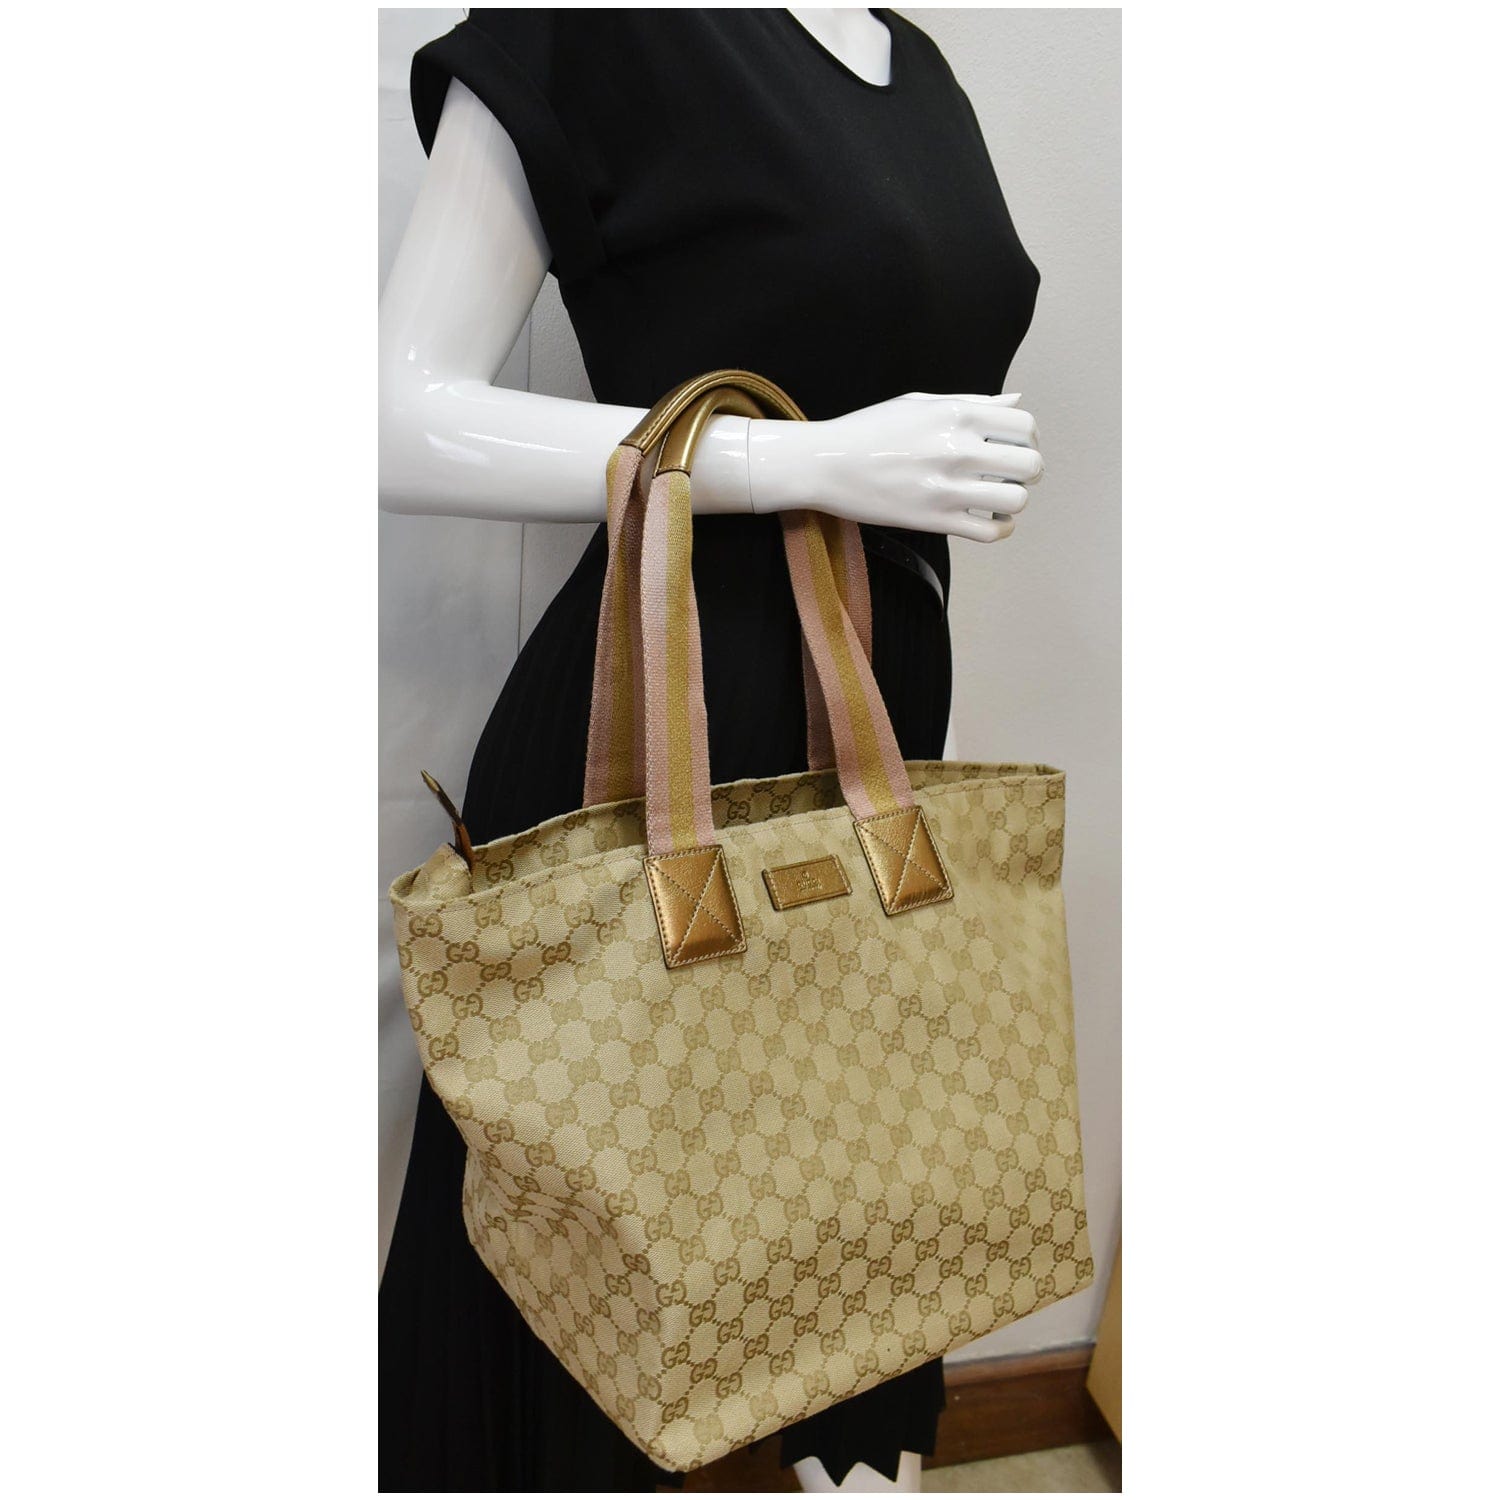 GUCCI-Sherry-GG-Canvas-Leather-Travel-Bag-Beige-Brown-153240 –  dct-ep_vintage luxury Store